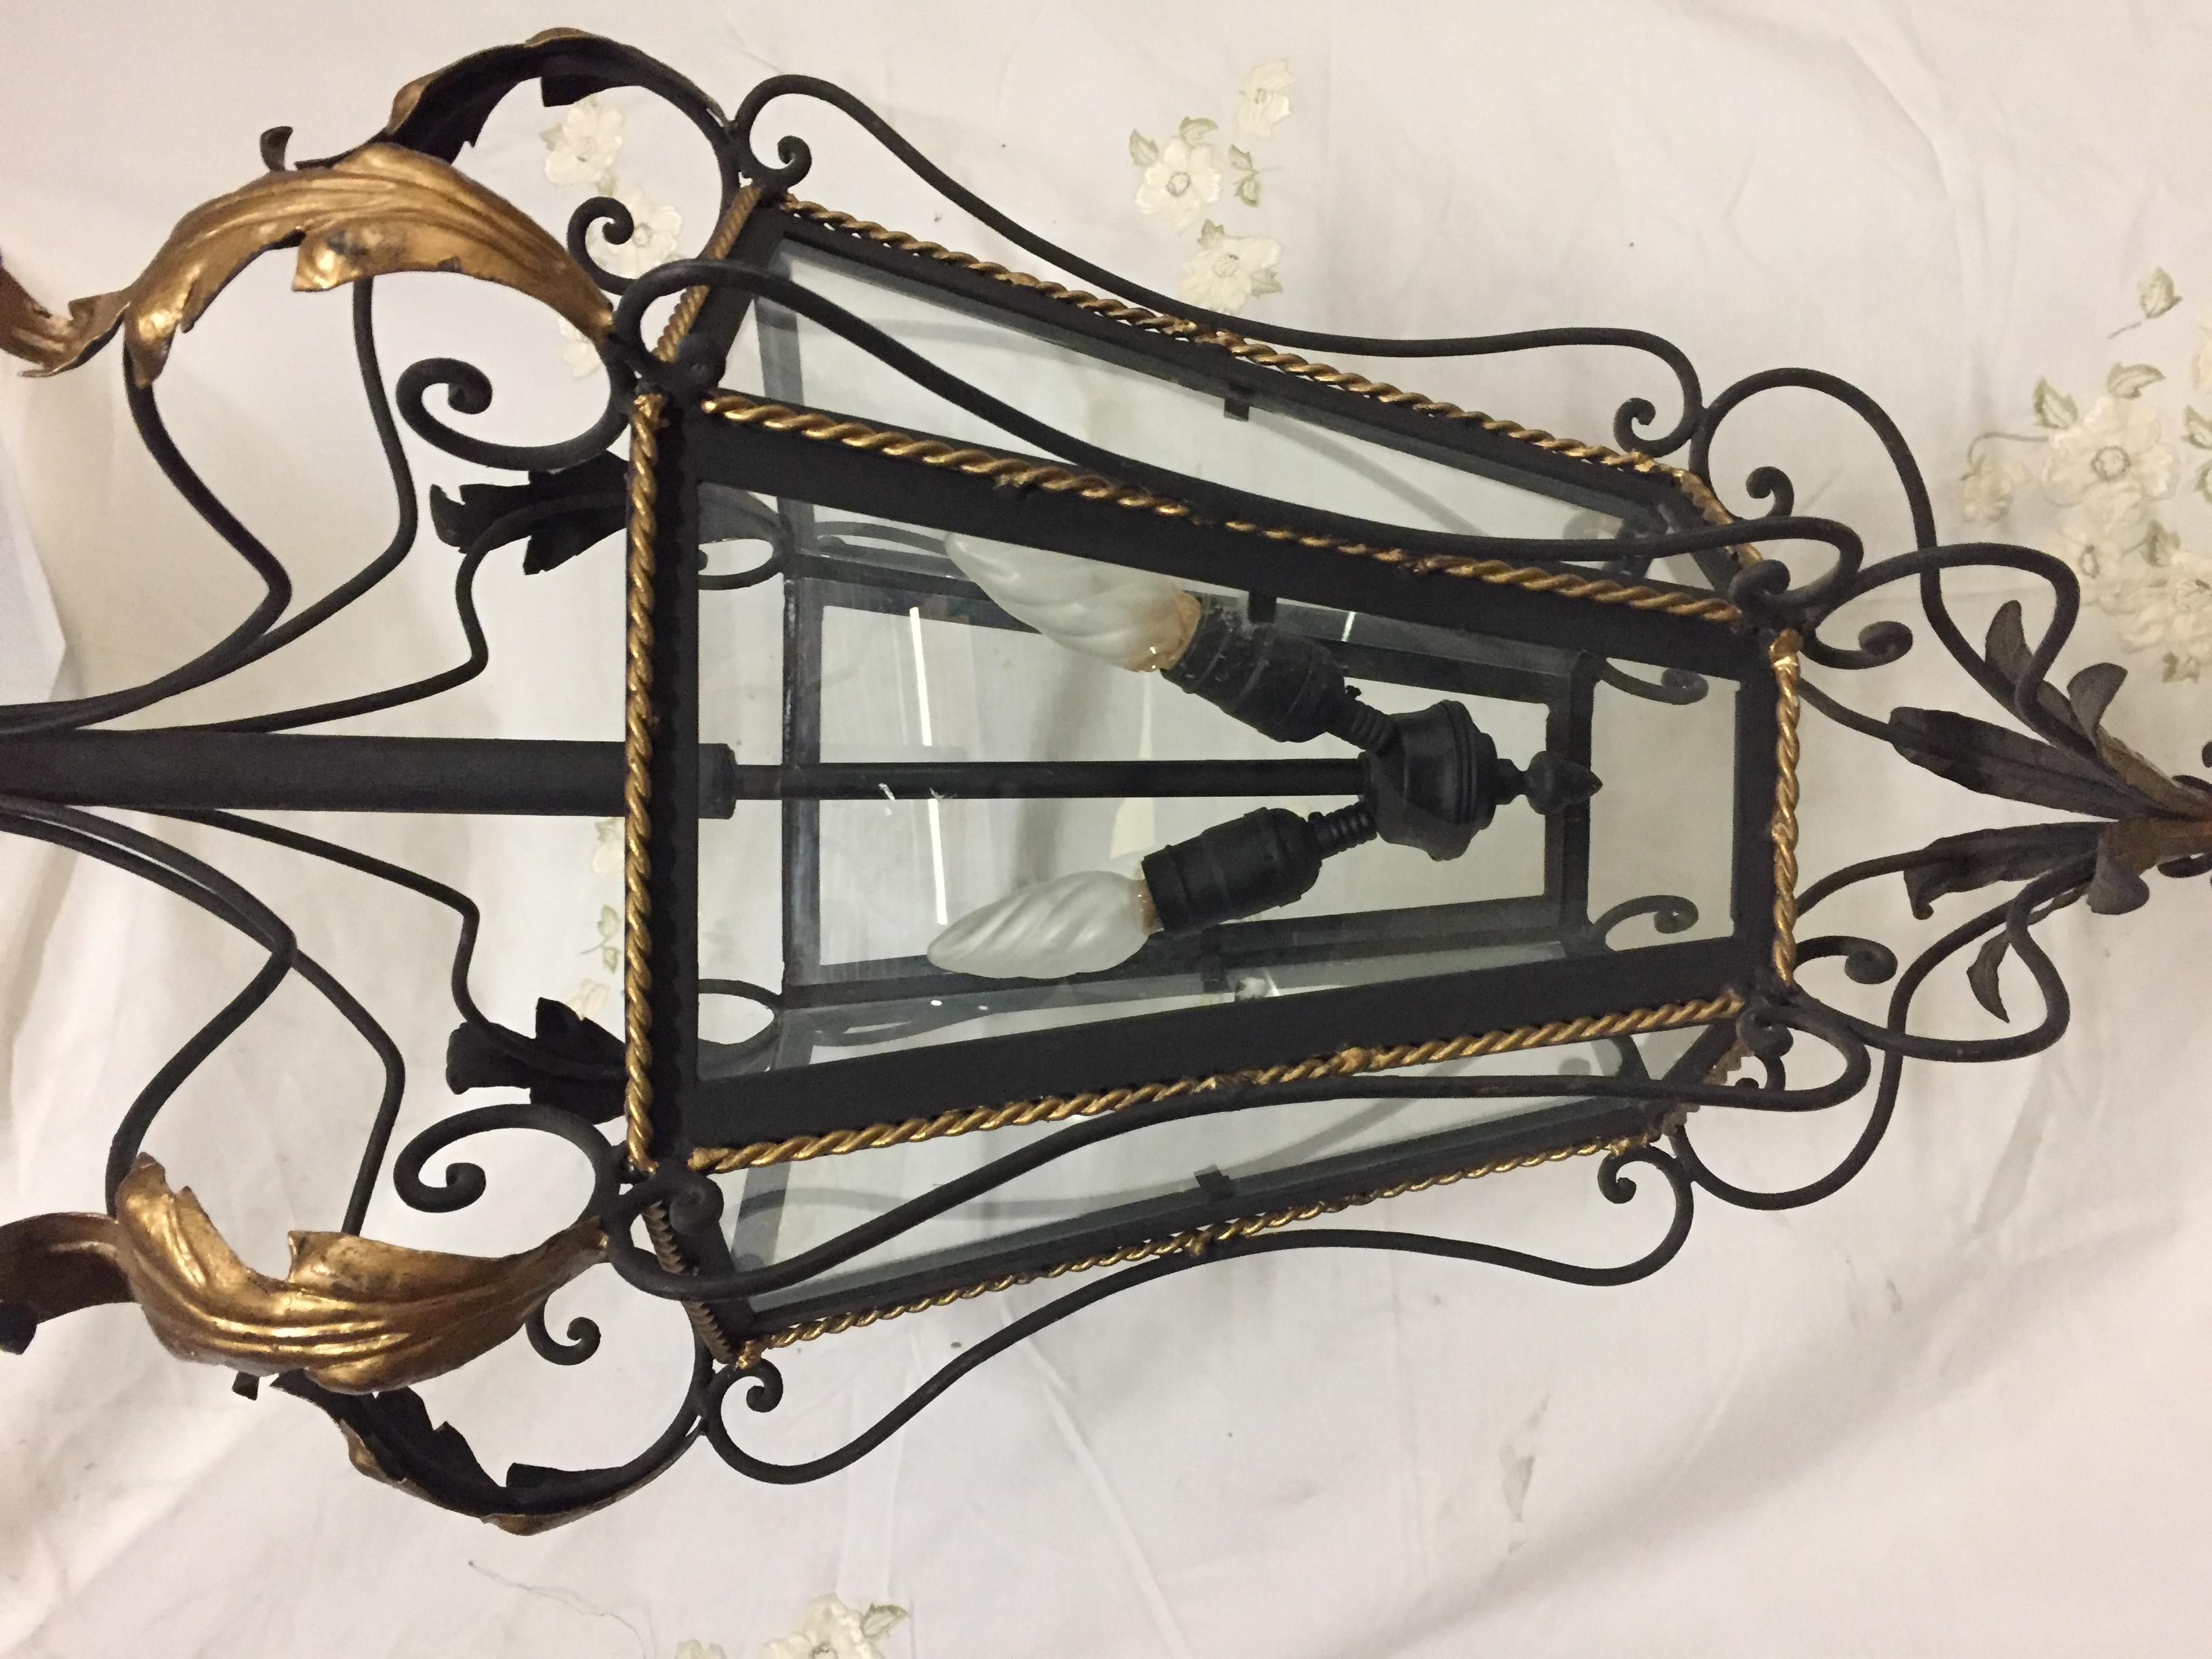 This grand chandelier makes a statement. The black painted iron frame has six glass tapered panels highlighted by gold painted twist and topped with flared gold painted leaves. There are 2 large base light sockets inside to provide high watt